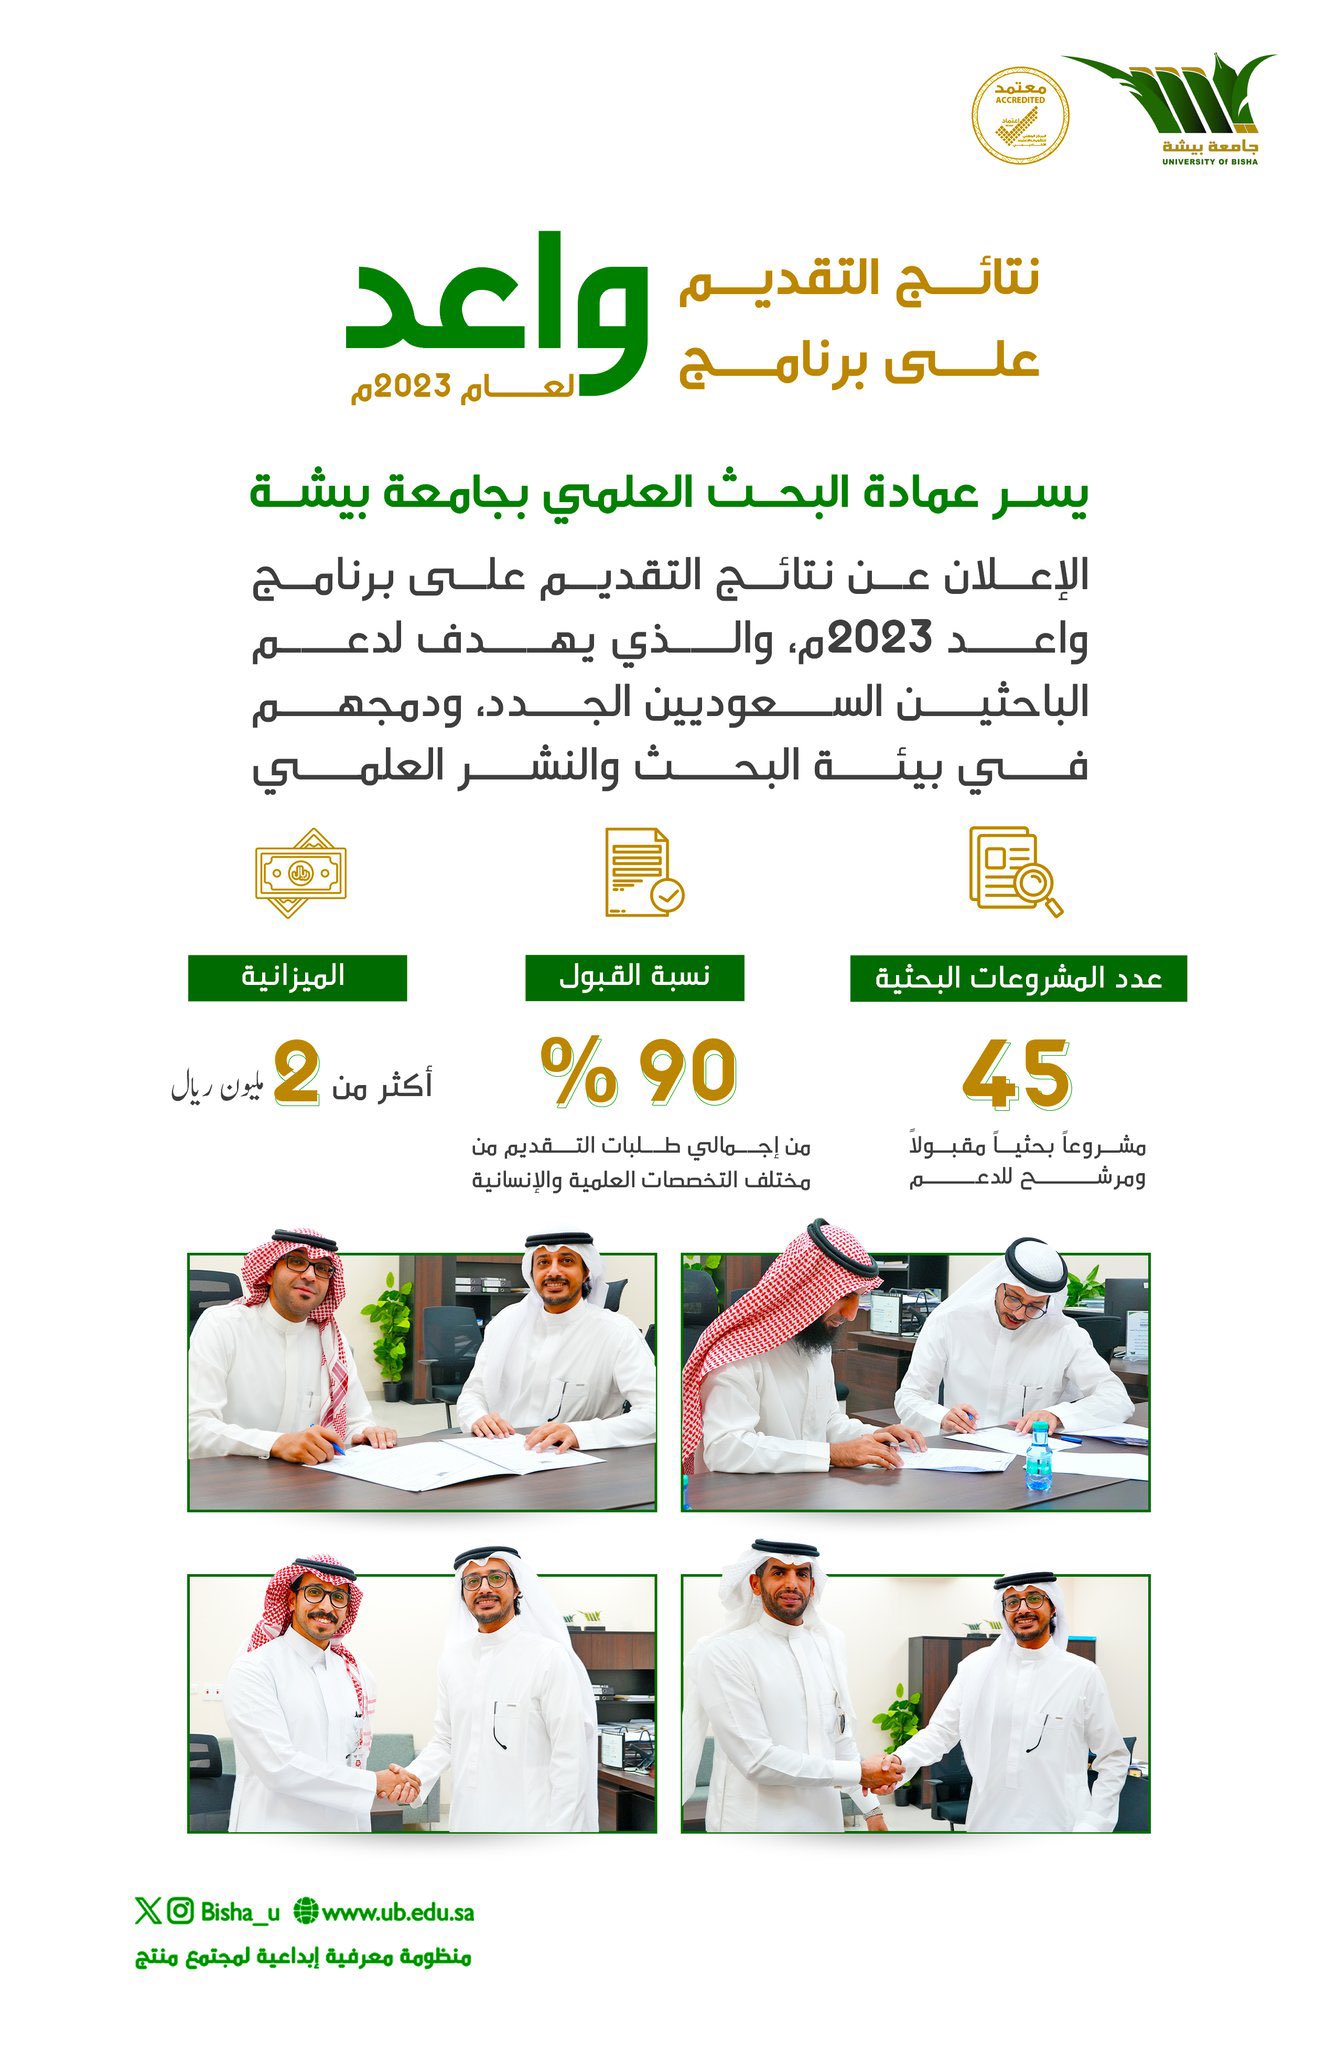 University of Bisha announces financial support for 45 research projects within the 